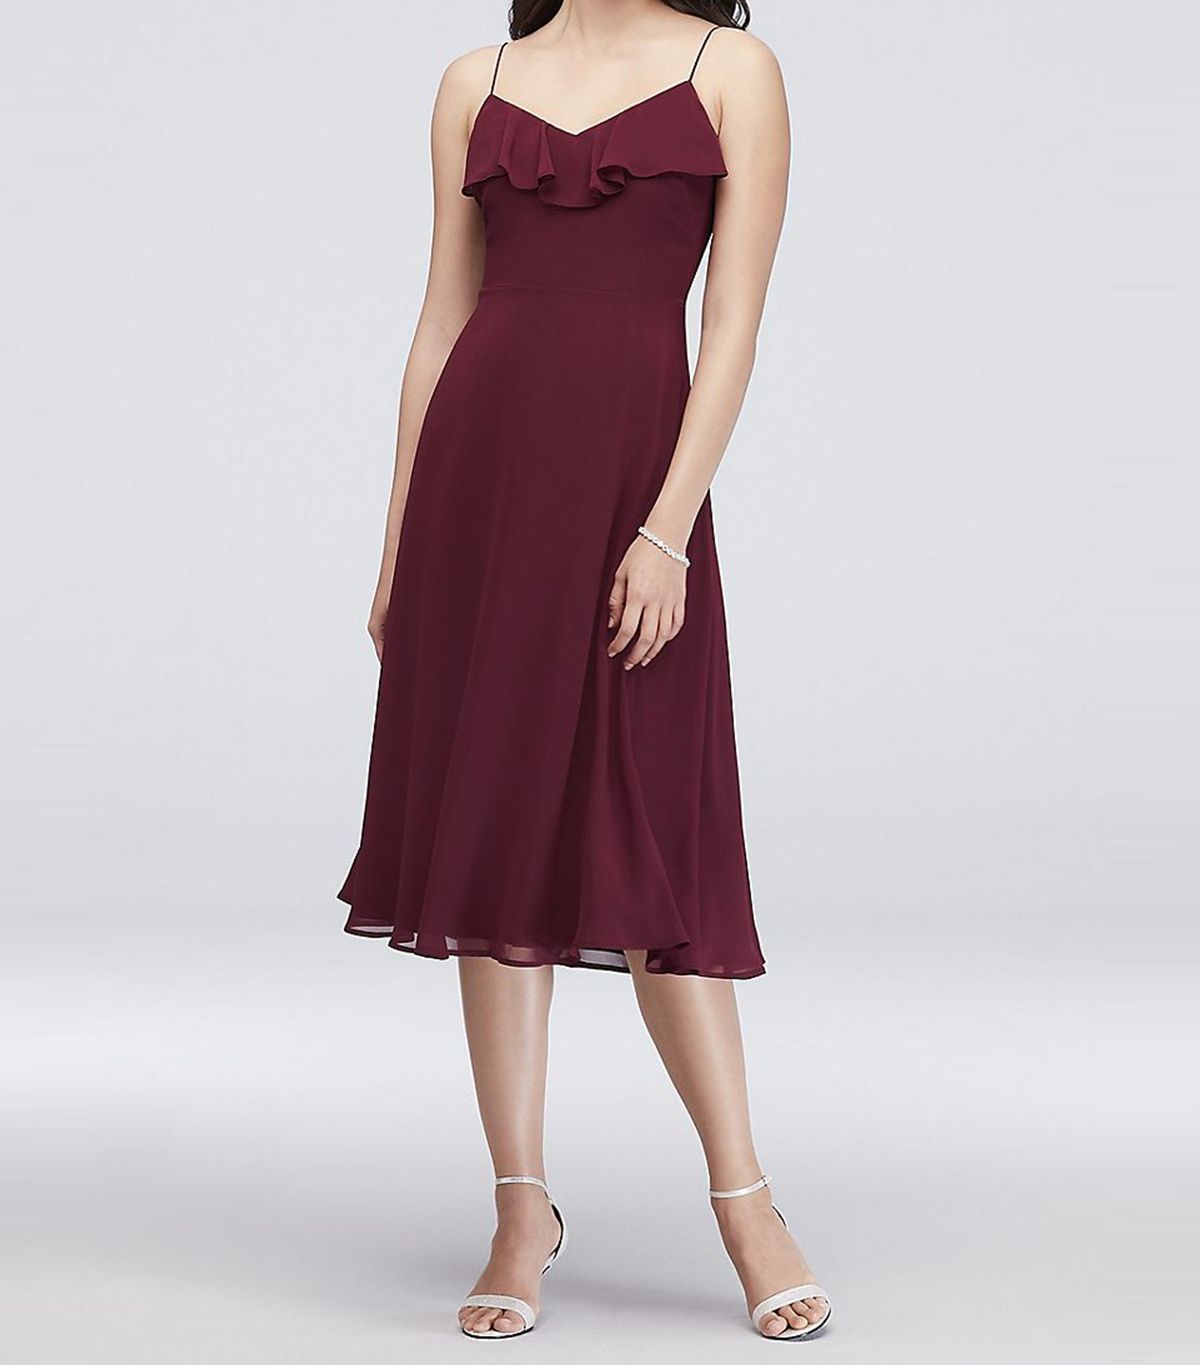 The Fall Bridesmaid Dress Colors of 2018 | Who What Wear